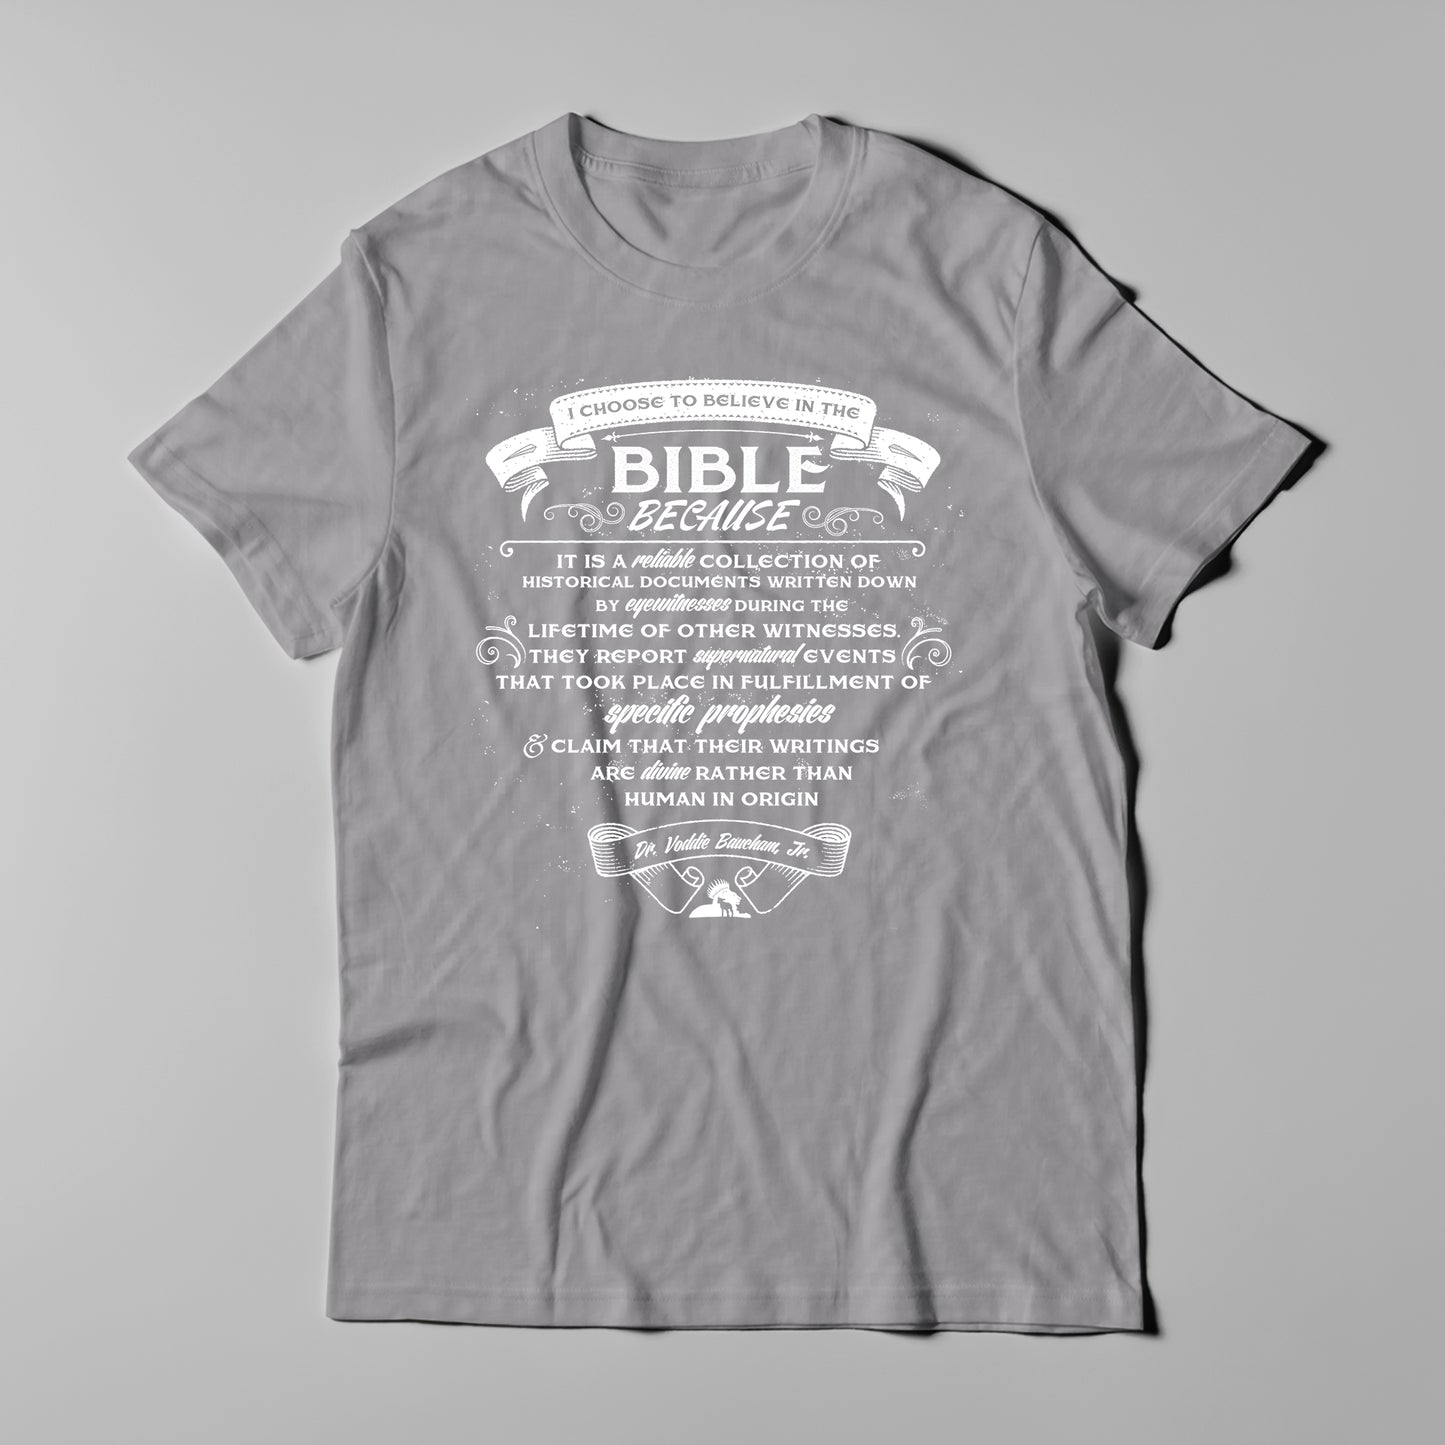 Why I Believe The Bible | T-Shirt (VBM)